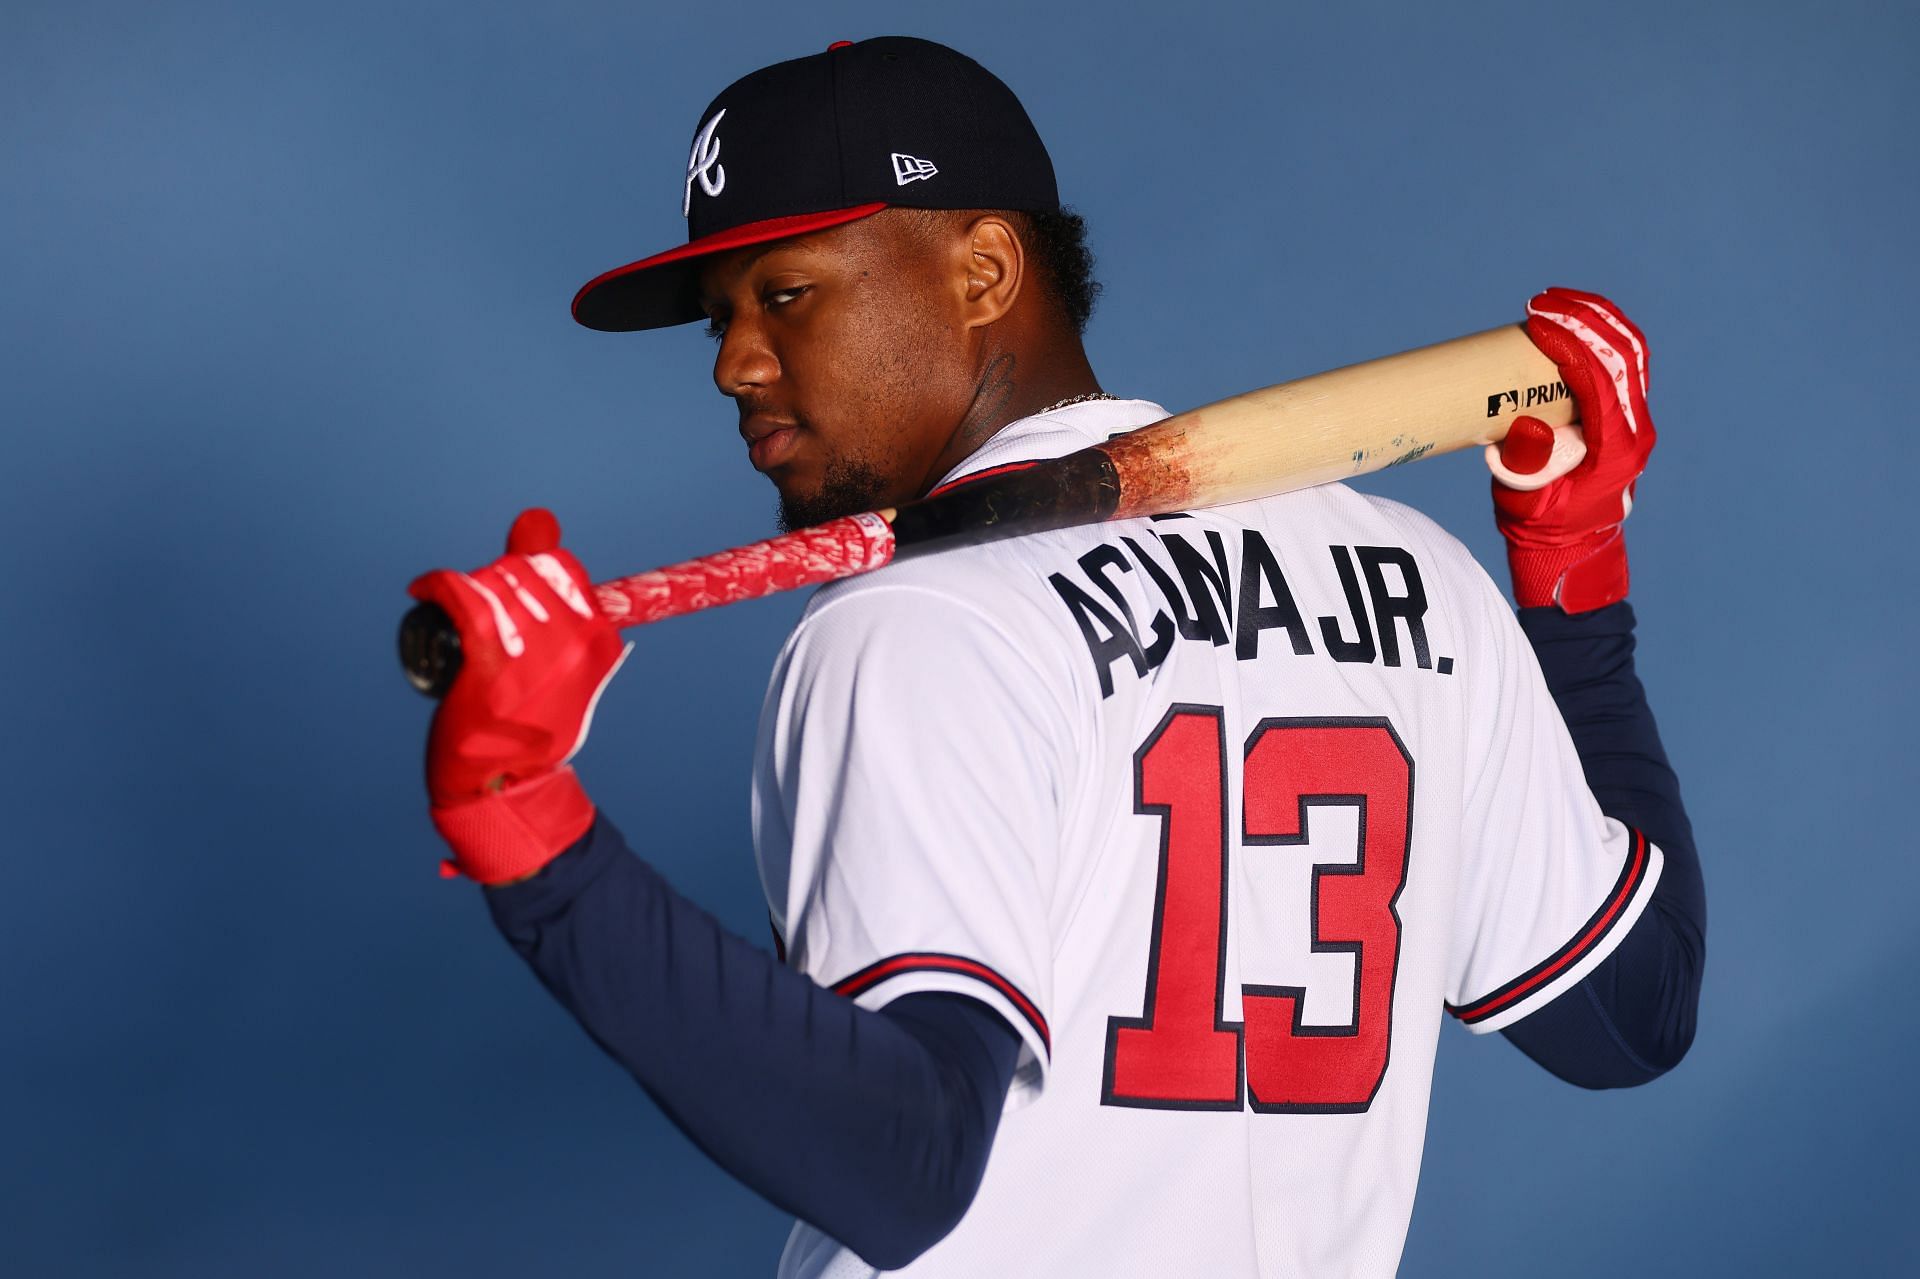 Ronald Acuna Jr. poses for a photo during the Atlanta Braves photo day